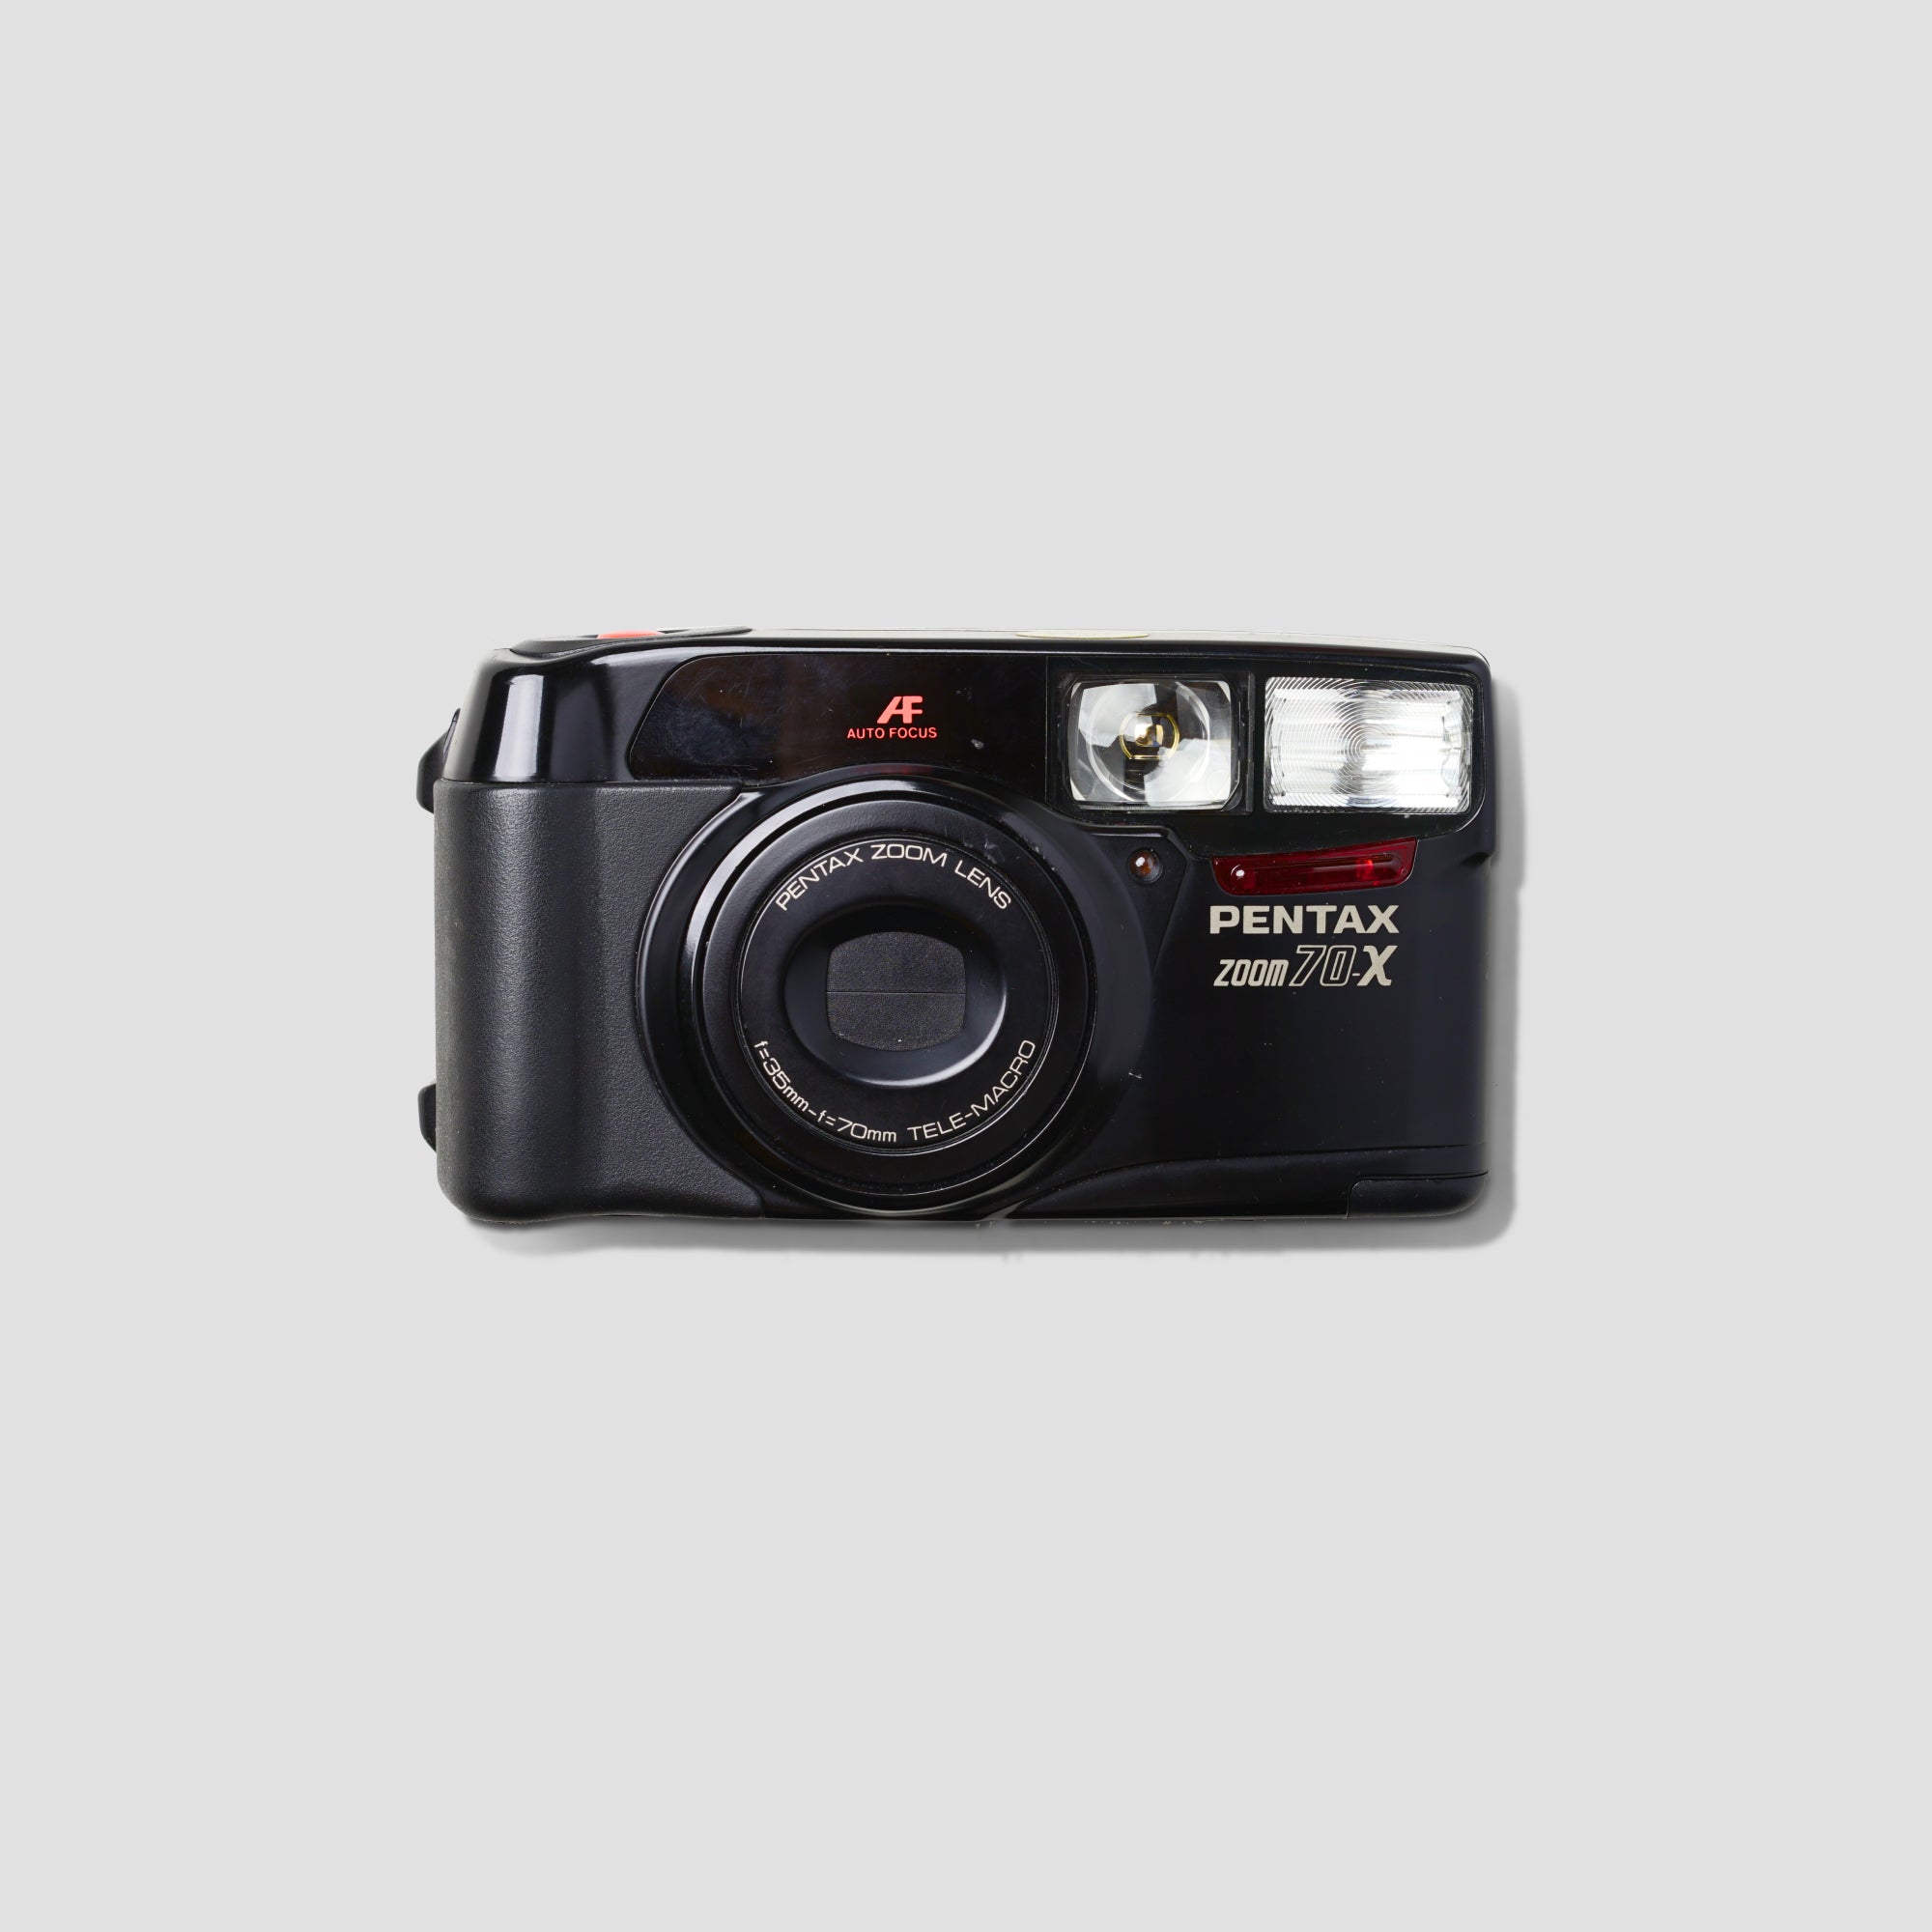 Buy Pentax Zoom 70-X now at Analogue Amsterdam